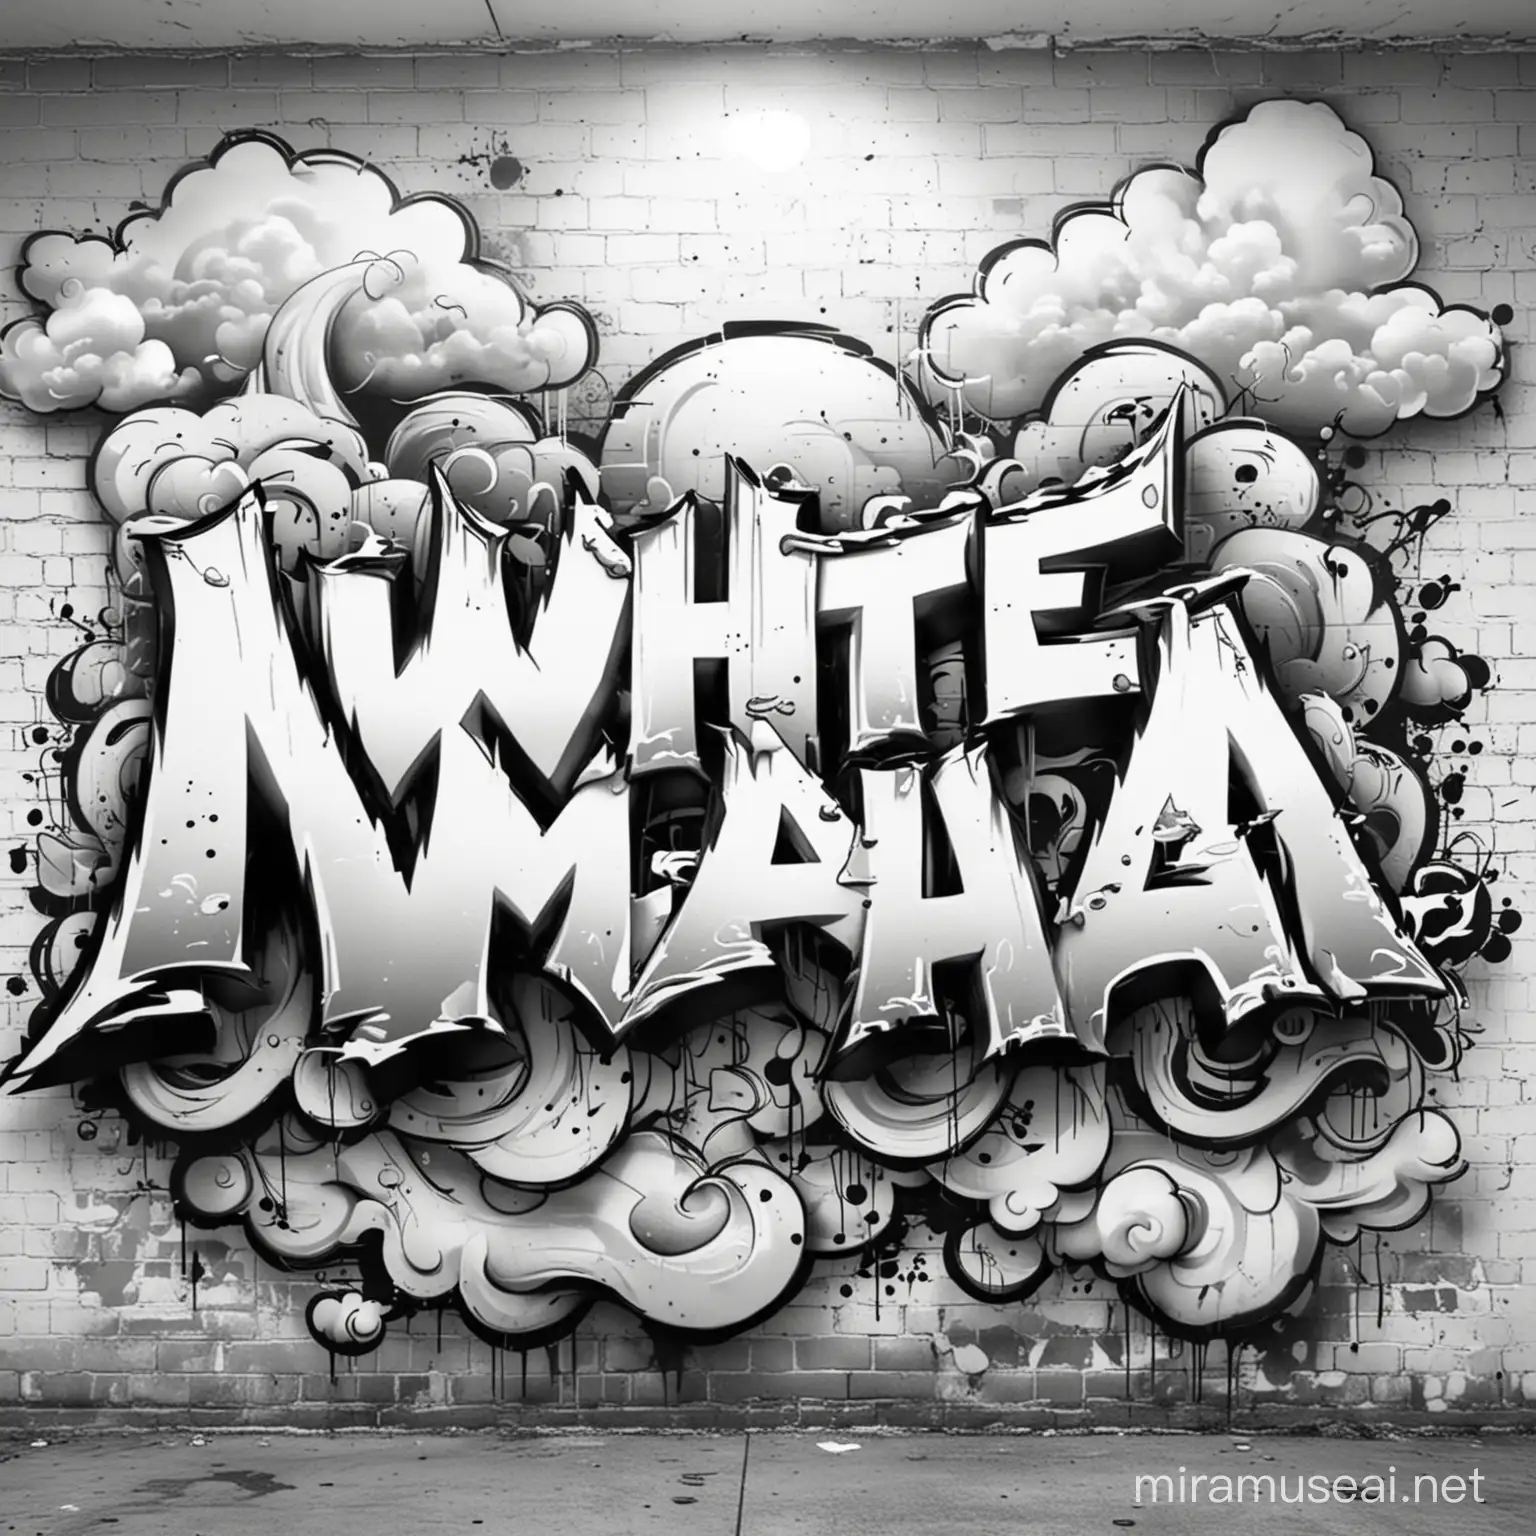 Graffiti Style Coloring Page with White Mafia Text and Dark Clouds